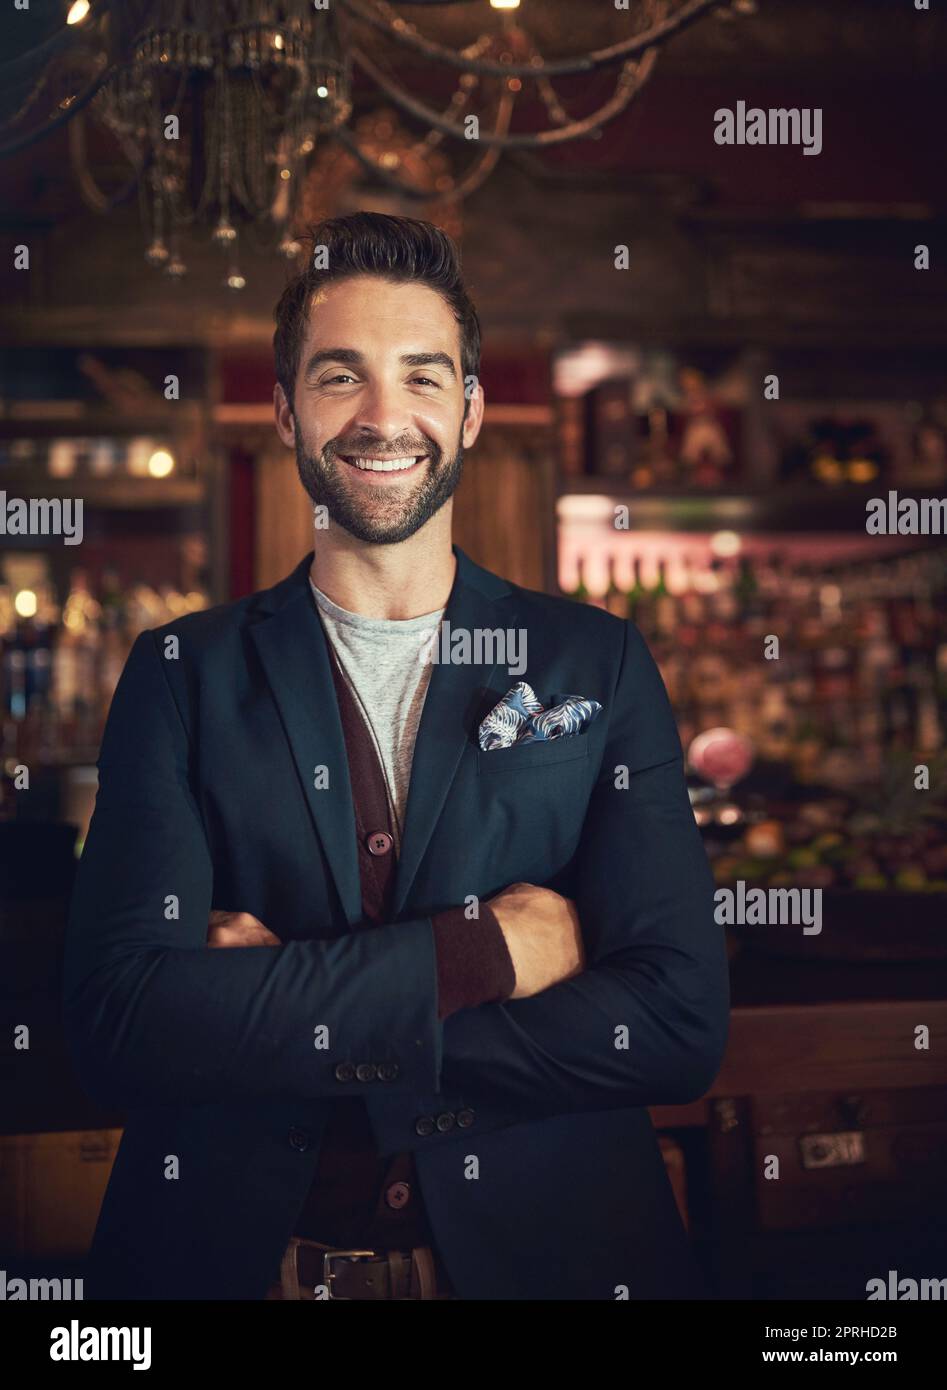 Sophisticated and suave. Cropped portrait of a young man standing in a bar. Stock Photo